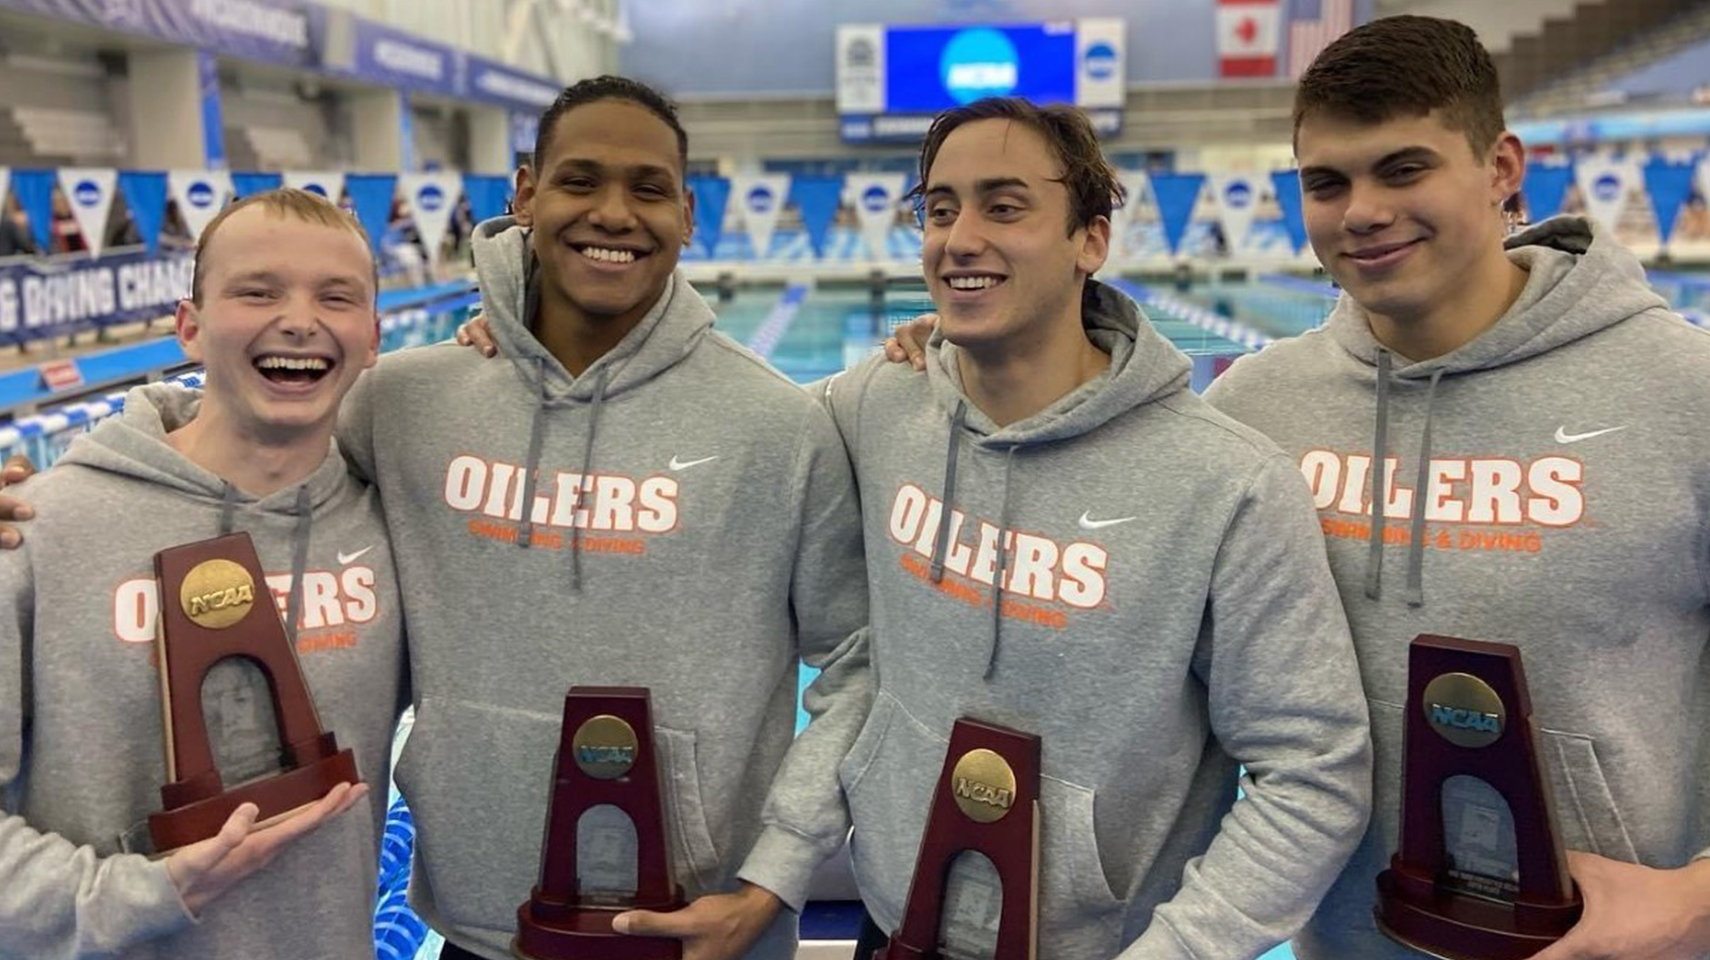 Men's swimmers smiling after earning all-american honors at the NCAA DII national championship